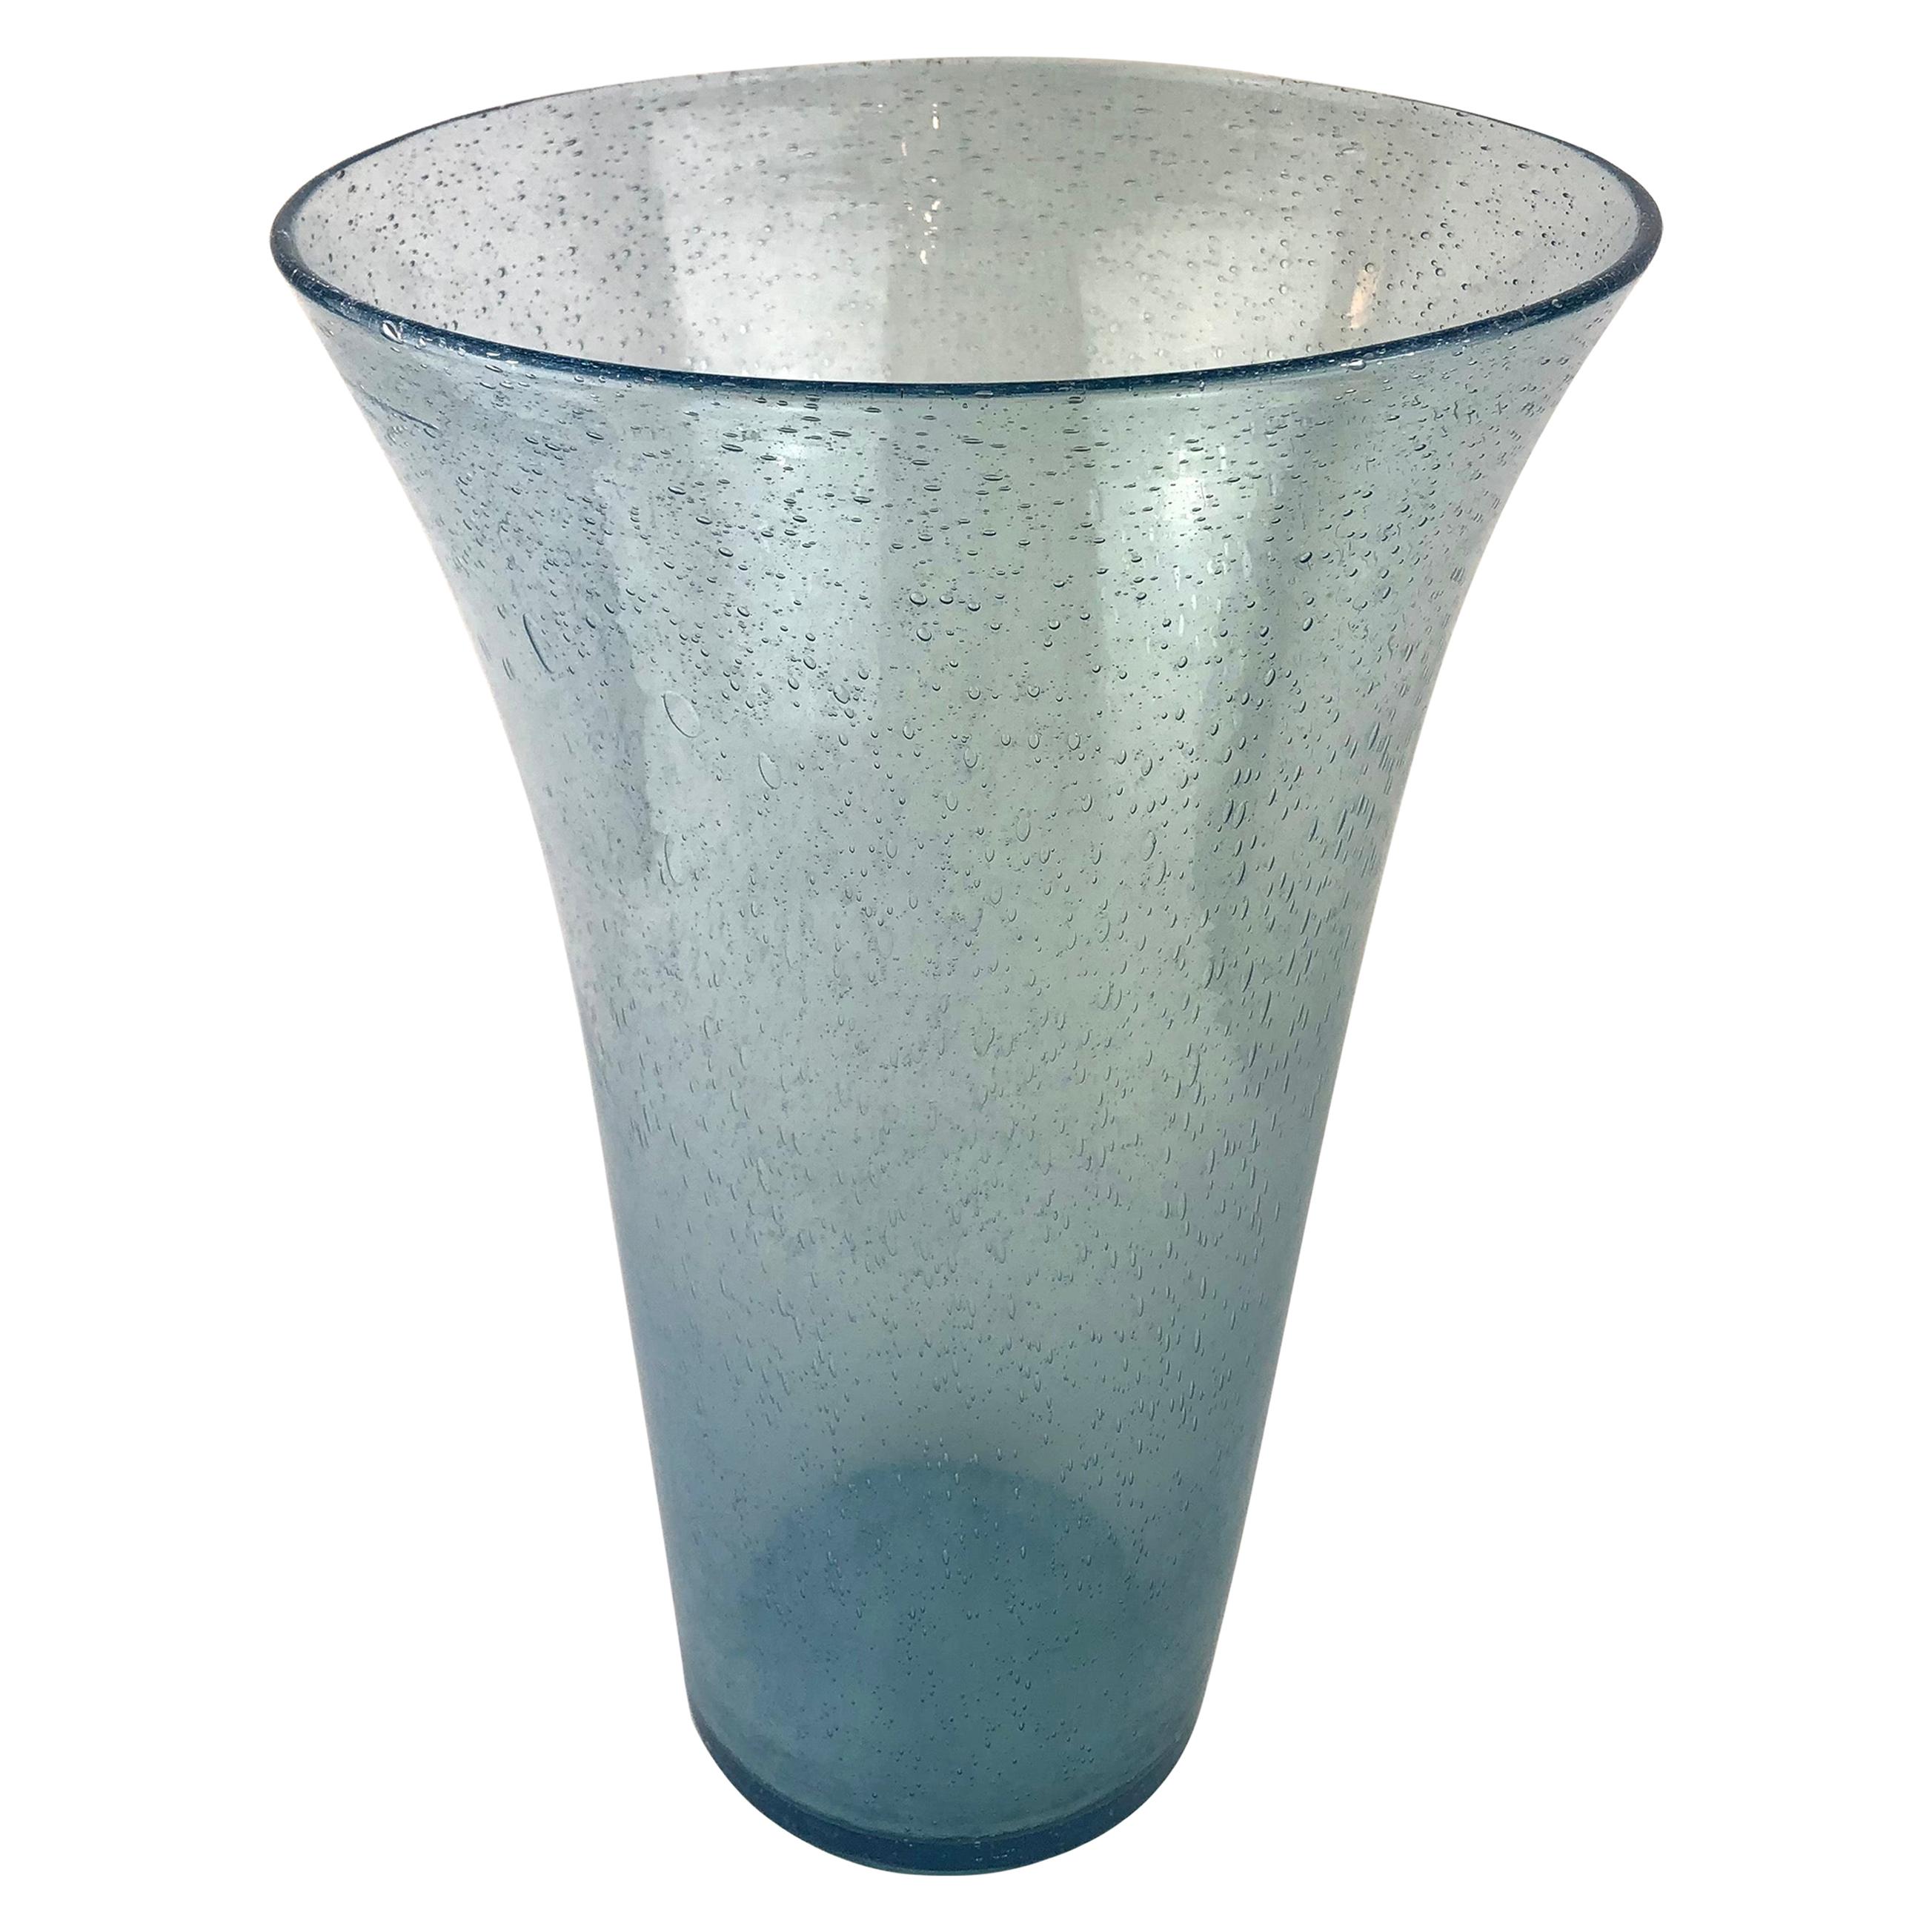 Large Translucent Blue Murano Art Glass Vase with Bubble Inclusions